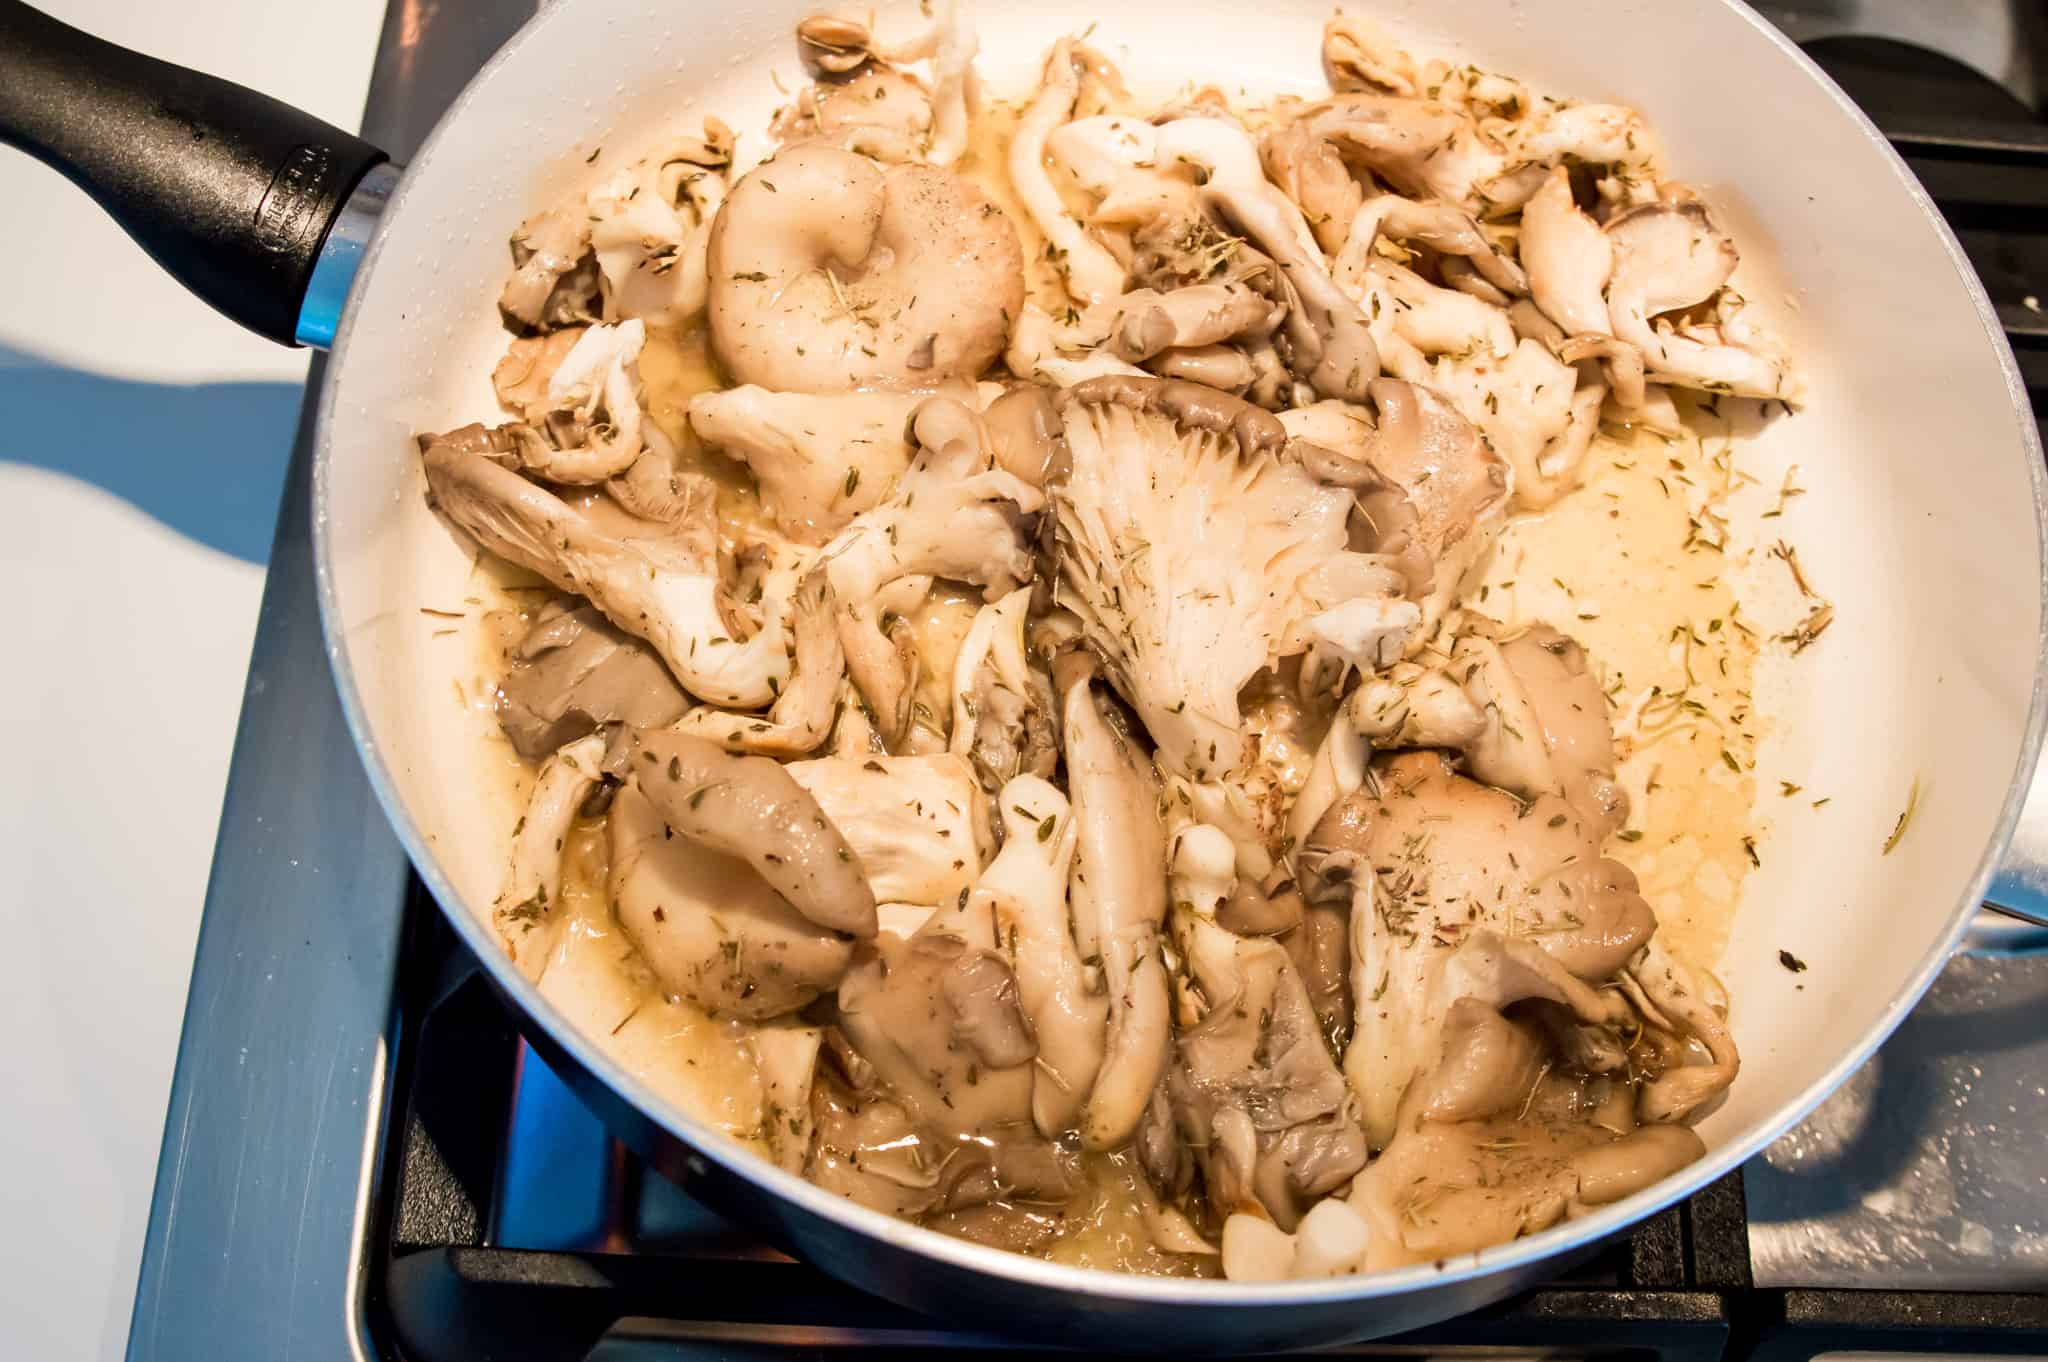 Oyster mushrooms cooking in a pan on the stovetop.